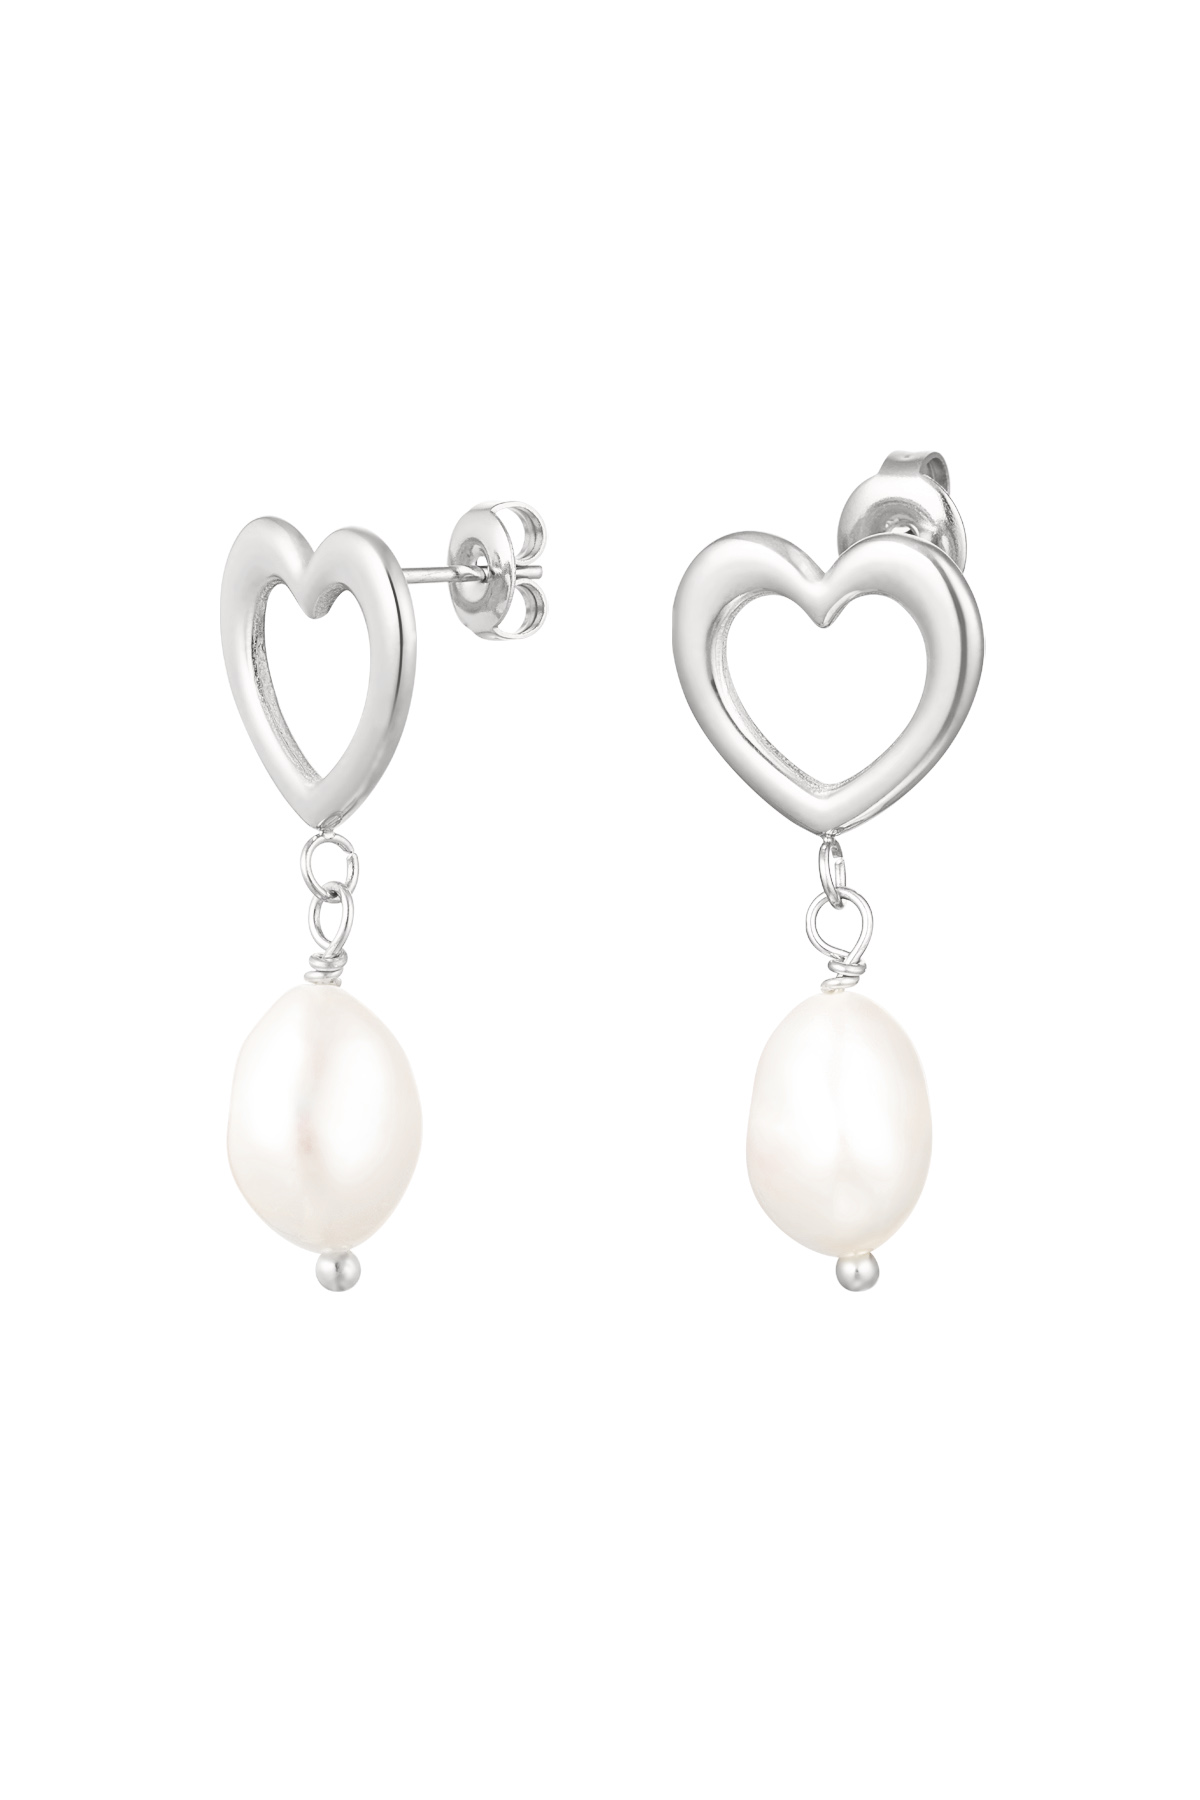 Earring heart with pearl detail - silver stainless steel h5 